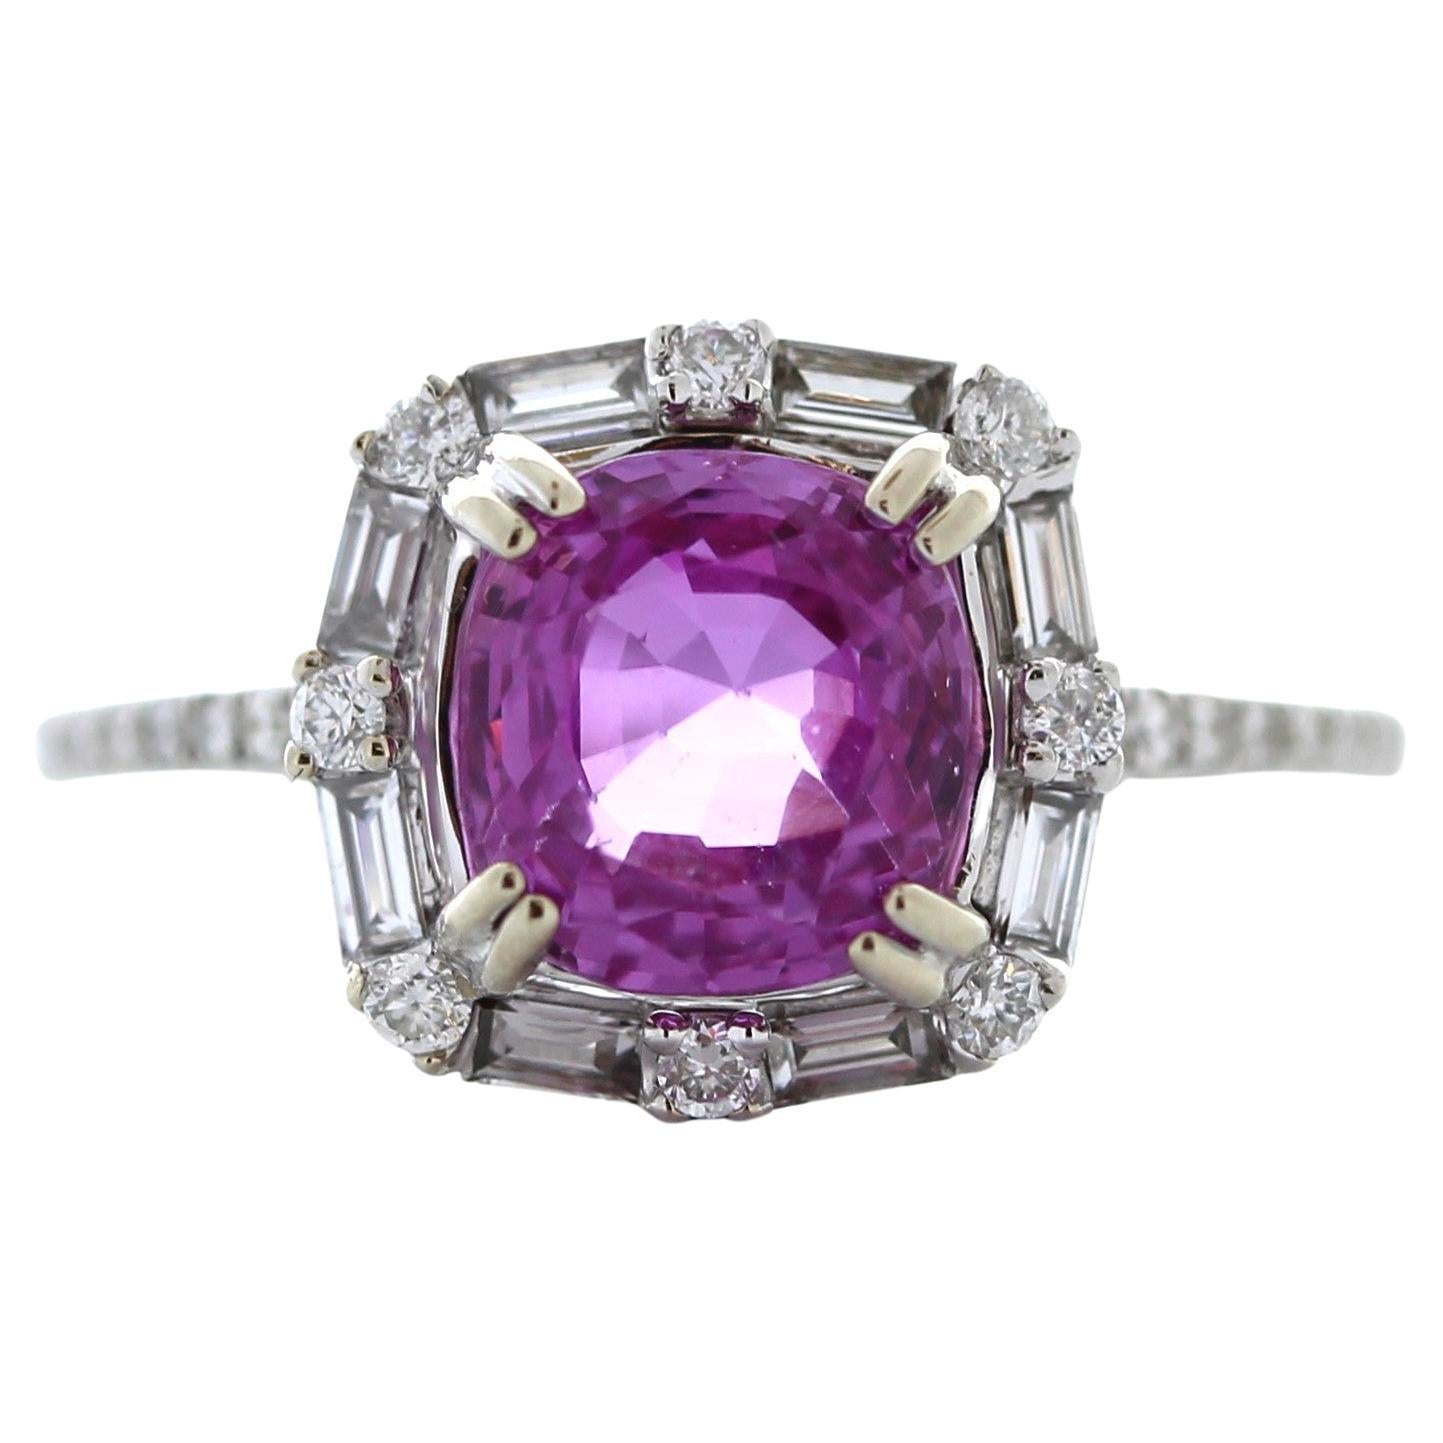 2.81 Carat Weight Pink Sapphire & Round Diamond Fashion Ring in 14k White Gold  For Sale